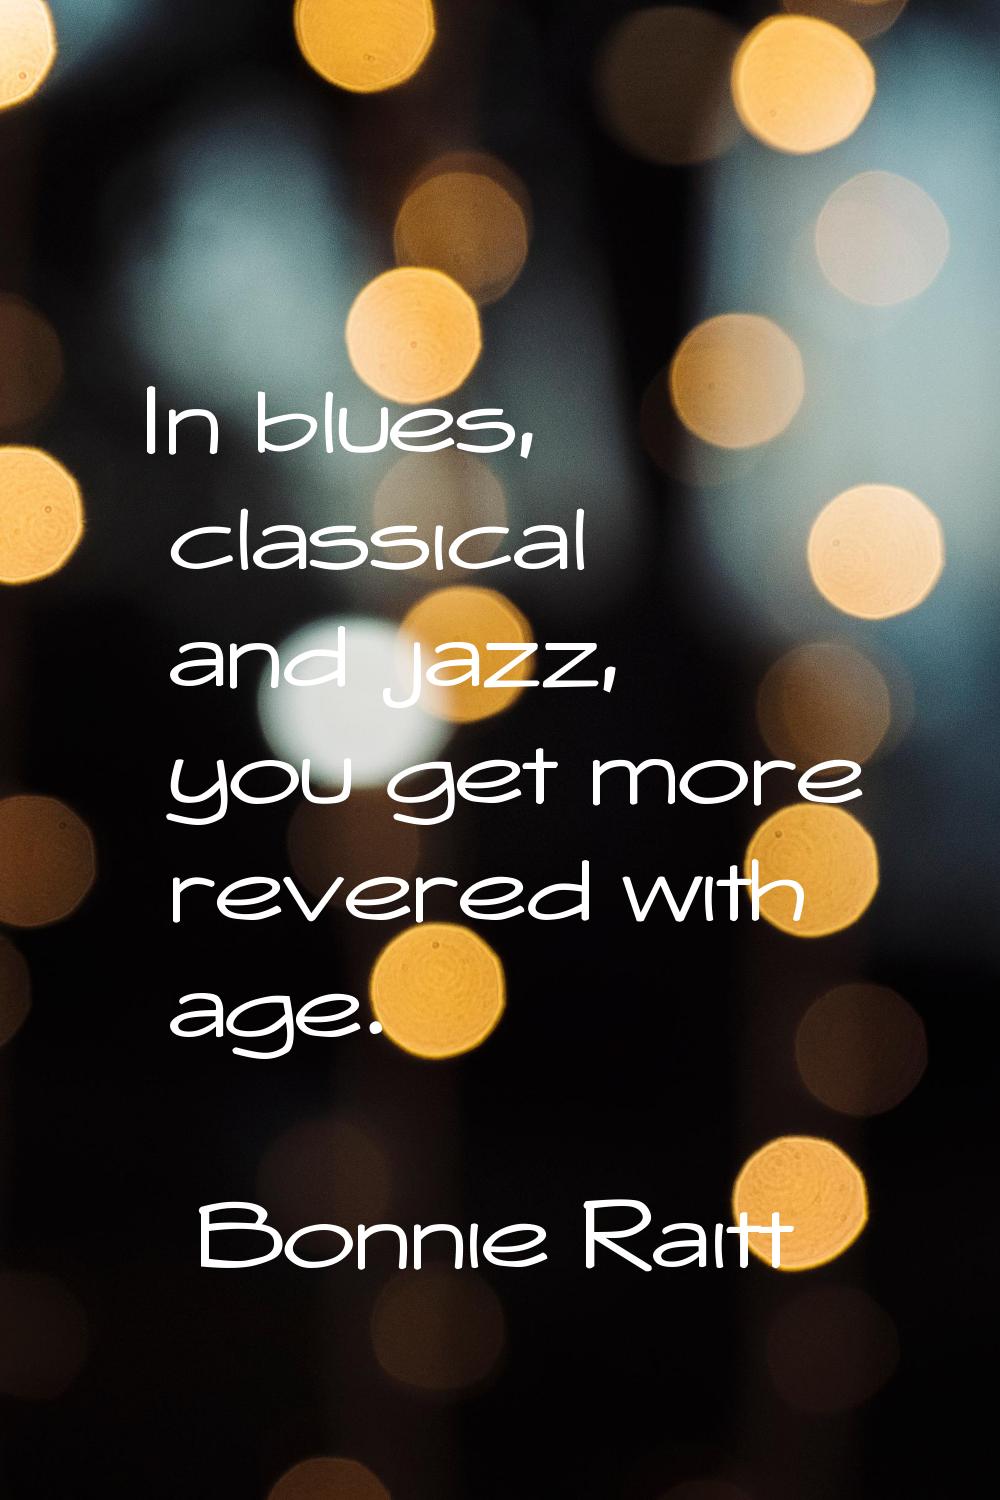 In blues, classical and jazz, you get more revered with age.